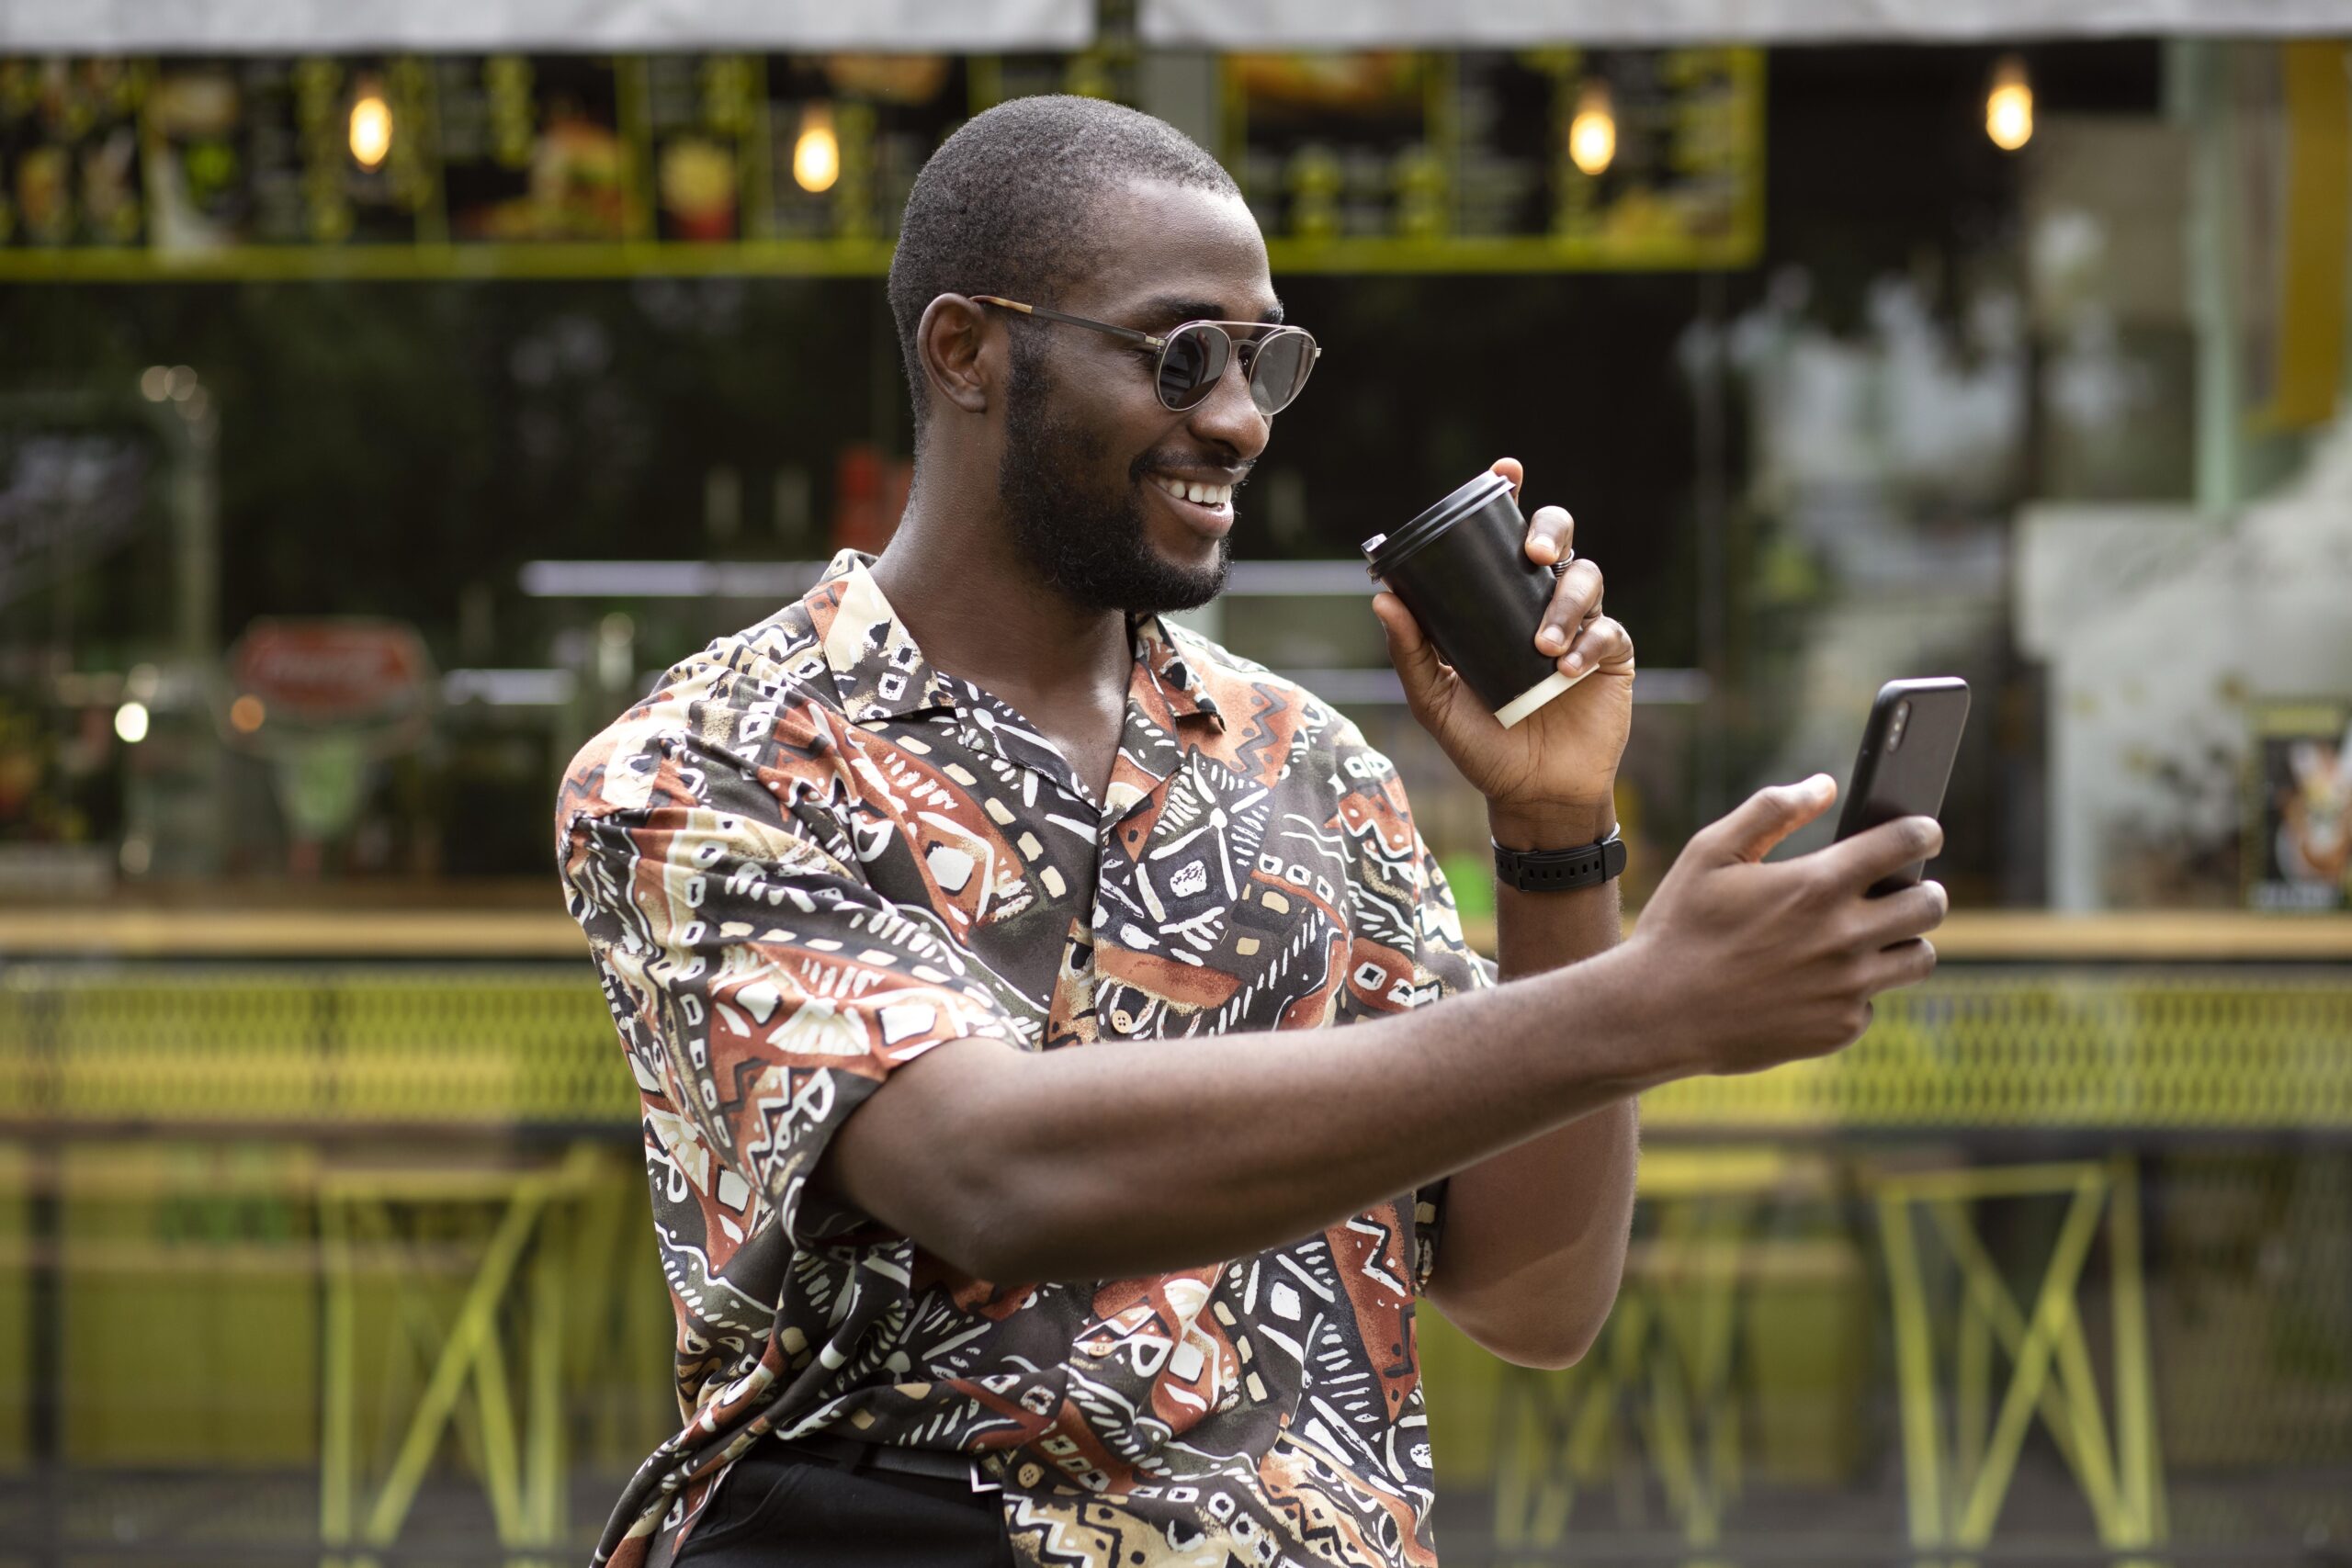  5 Things to Consider When Choosing an Influencer in Tanzania